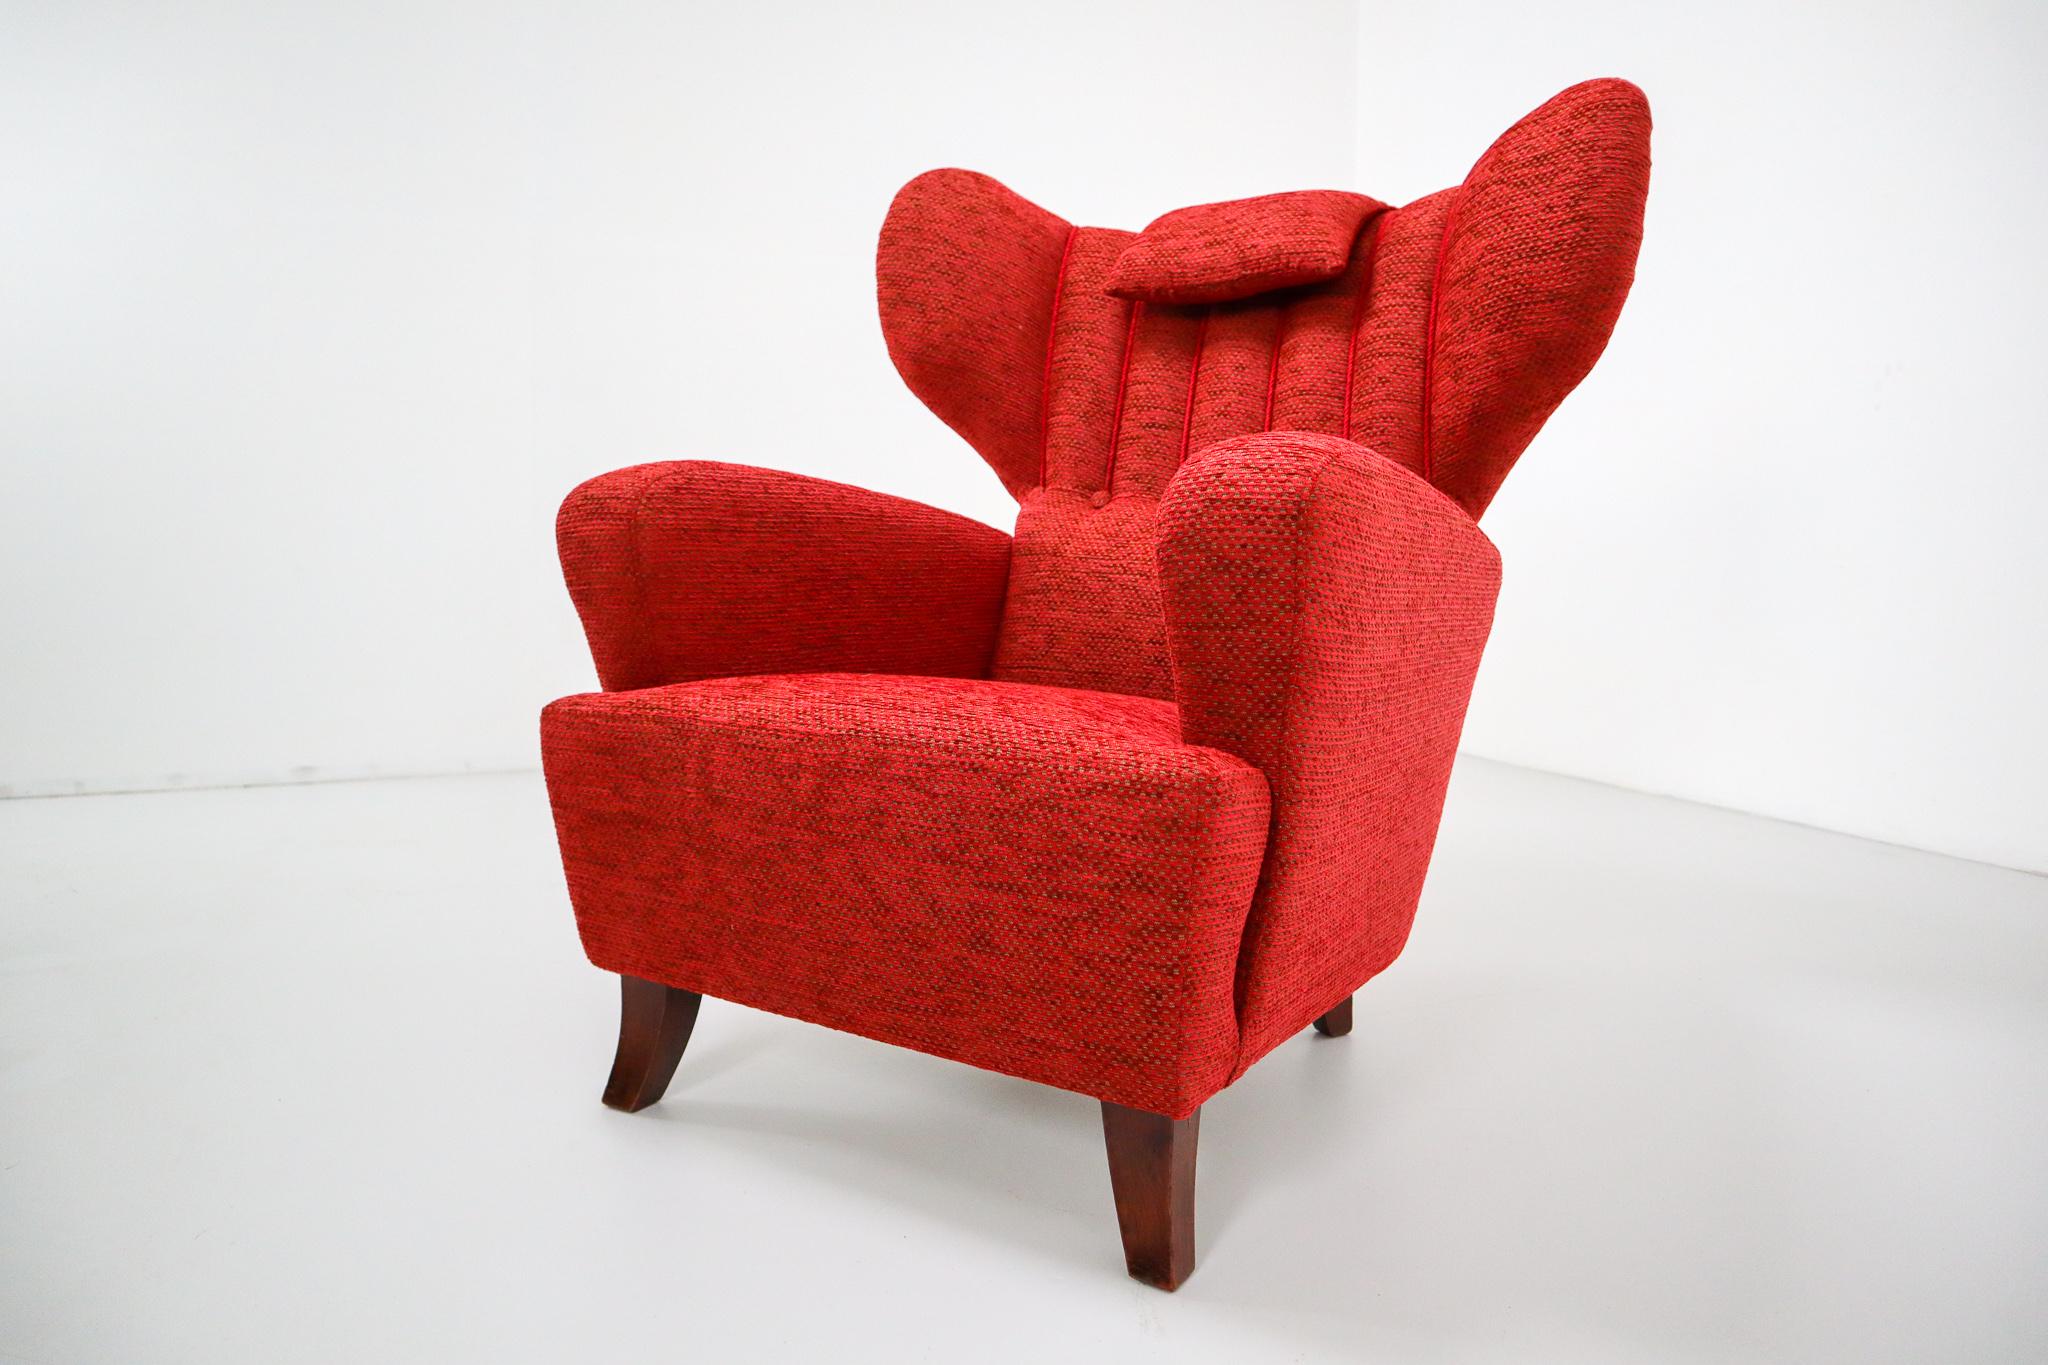 Mid-20th century red reupholstered wingback chair, Austria, 1930s .This chair is newly upholstered with a beautiful red new fabric. The wingback shows beautiful curves and organic lines. Due the high back and 'wings' or 'ears' this chair give a warm